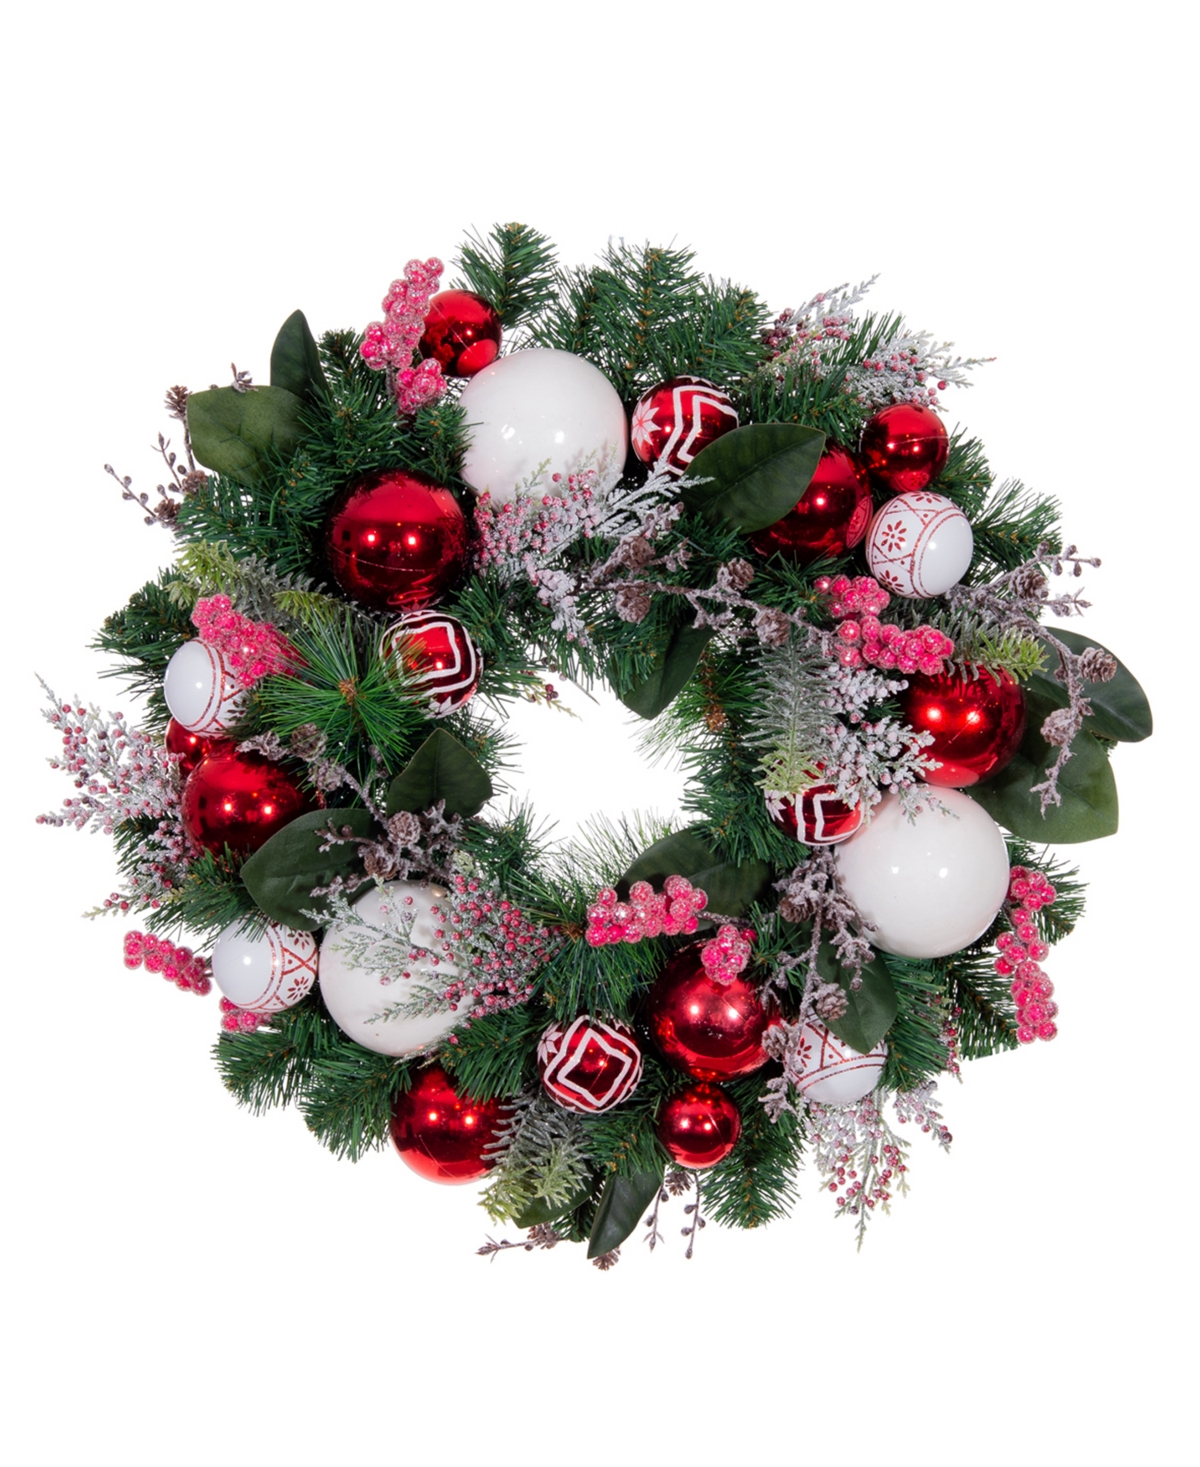 Village Lighting 24" Lighted Christmas Wreath, Nordic In Assorted